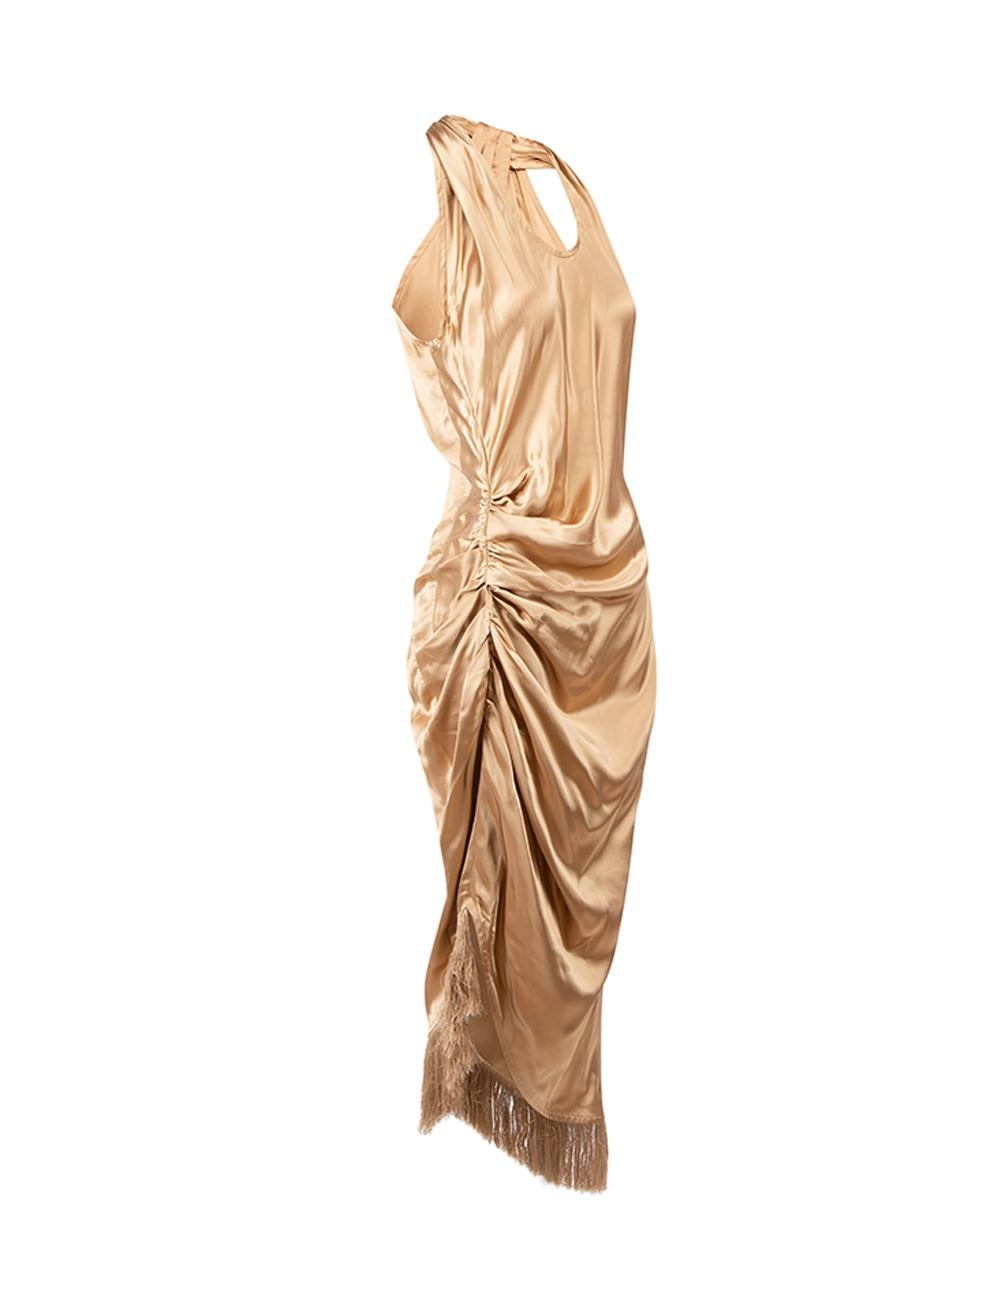 CONDITION is Very good. Hardly any visible wear to dress is evident on this used Helmut Lang designer resale item. 



Details


Gold

Viscose

Midi dress

Asymmetric and ruched design

Halter- round neckline

Side zip closure

Fringed